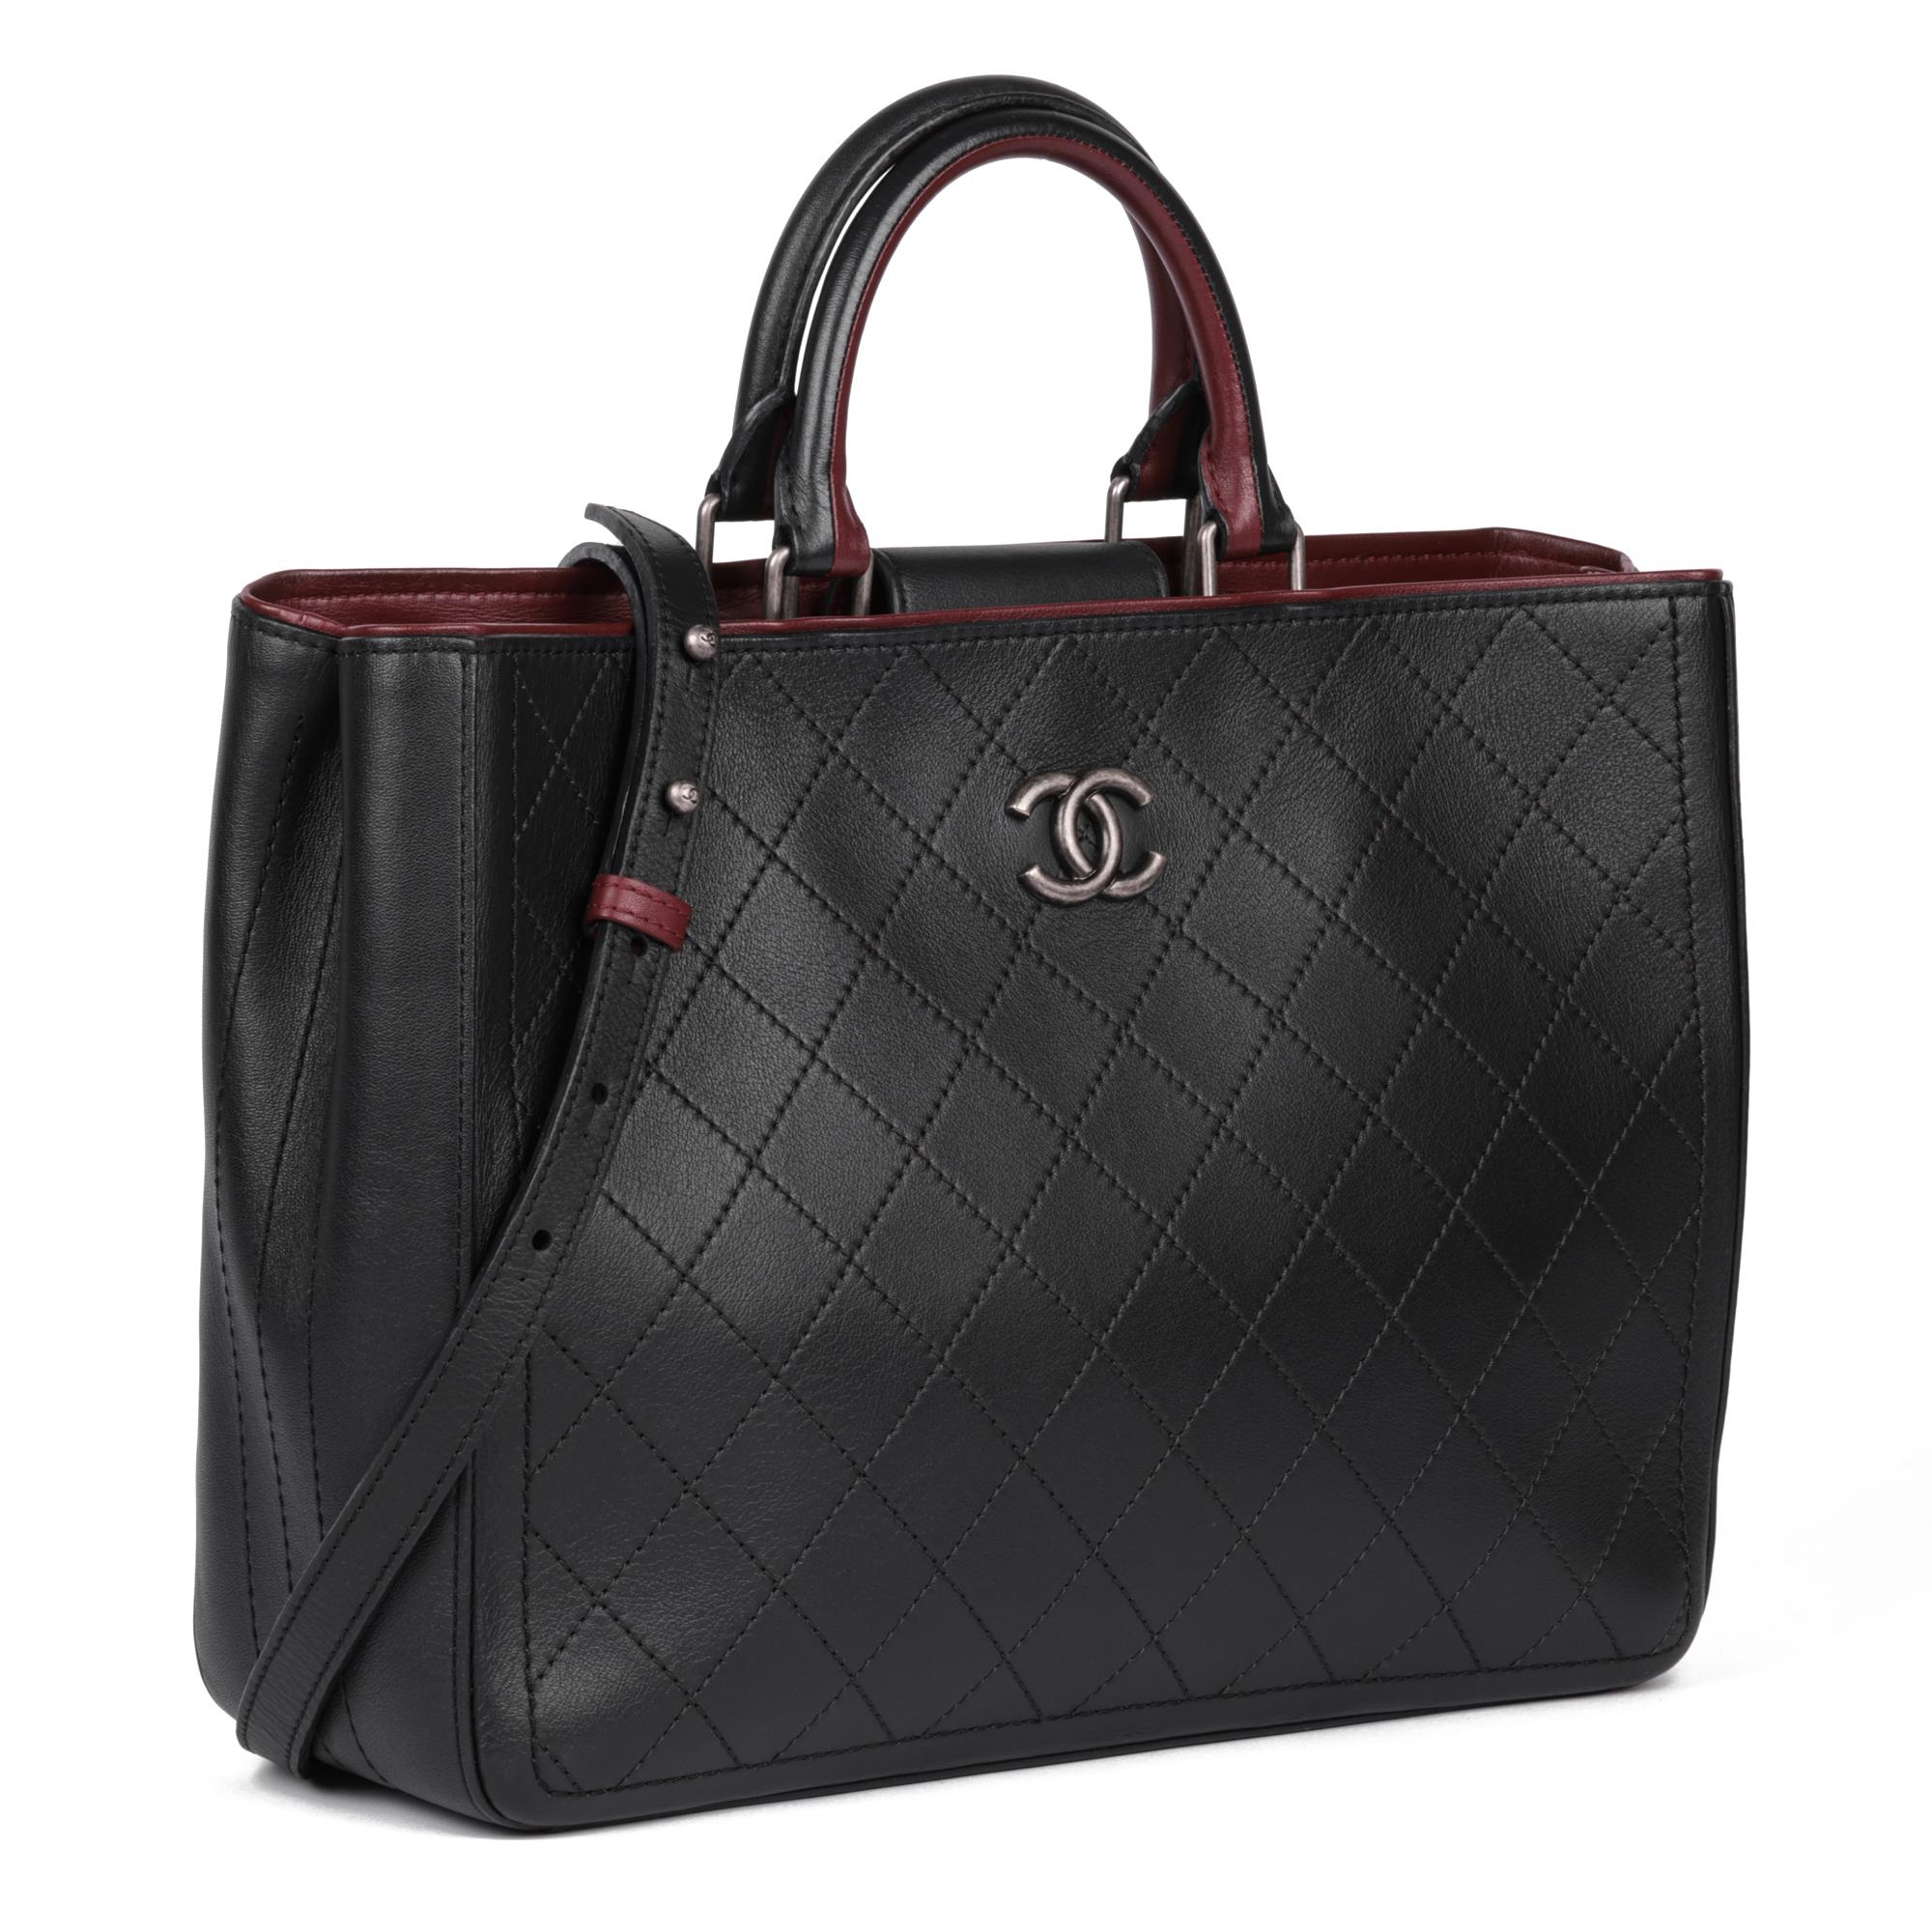 CHANEL
Black Quilted Bullskin Leather & Burgundy Large Classic Shopping Tote

Serial Number: 24351373
Age (Circa): 2018
Accompanied By: Chanel Dust Bag, Box, Authenticity Card, Shoulder Strap
Authenticity Details: Authenticity Card, Serial Sticker